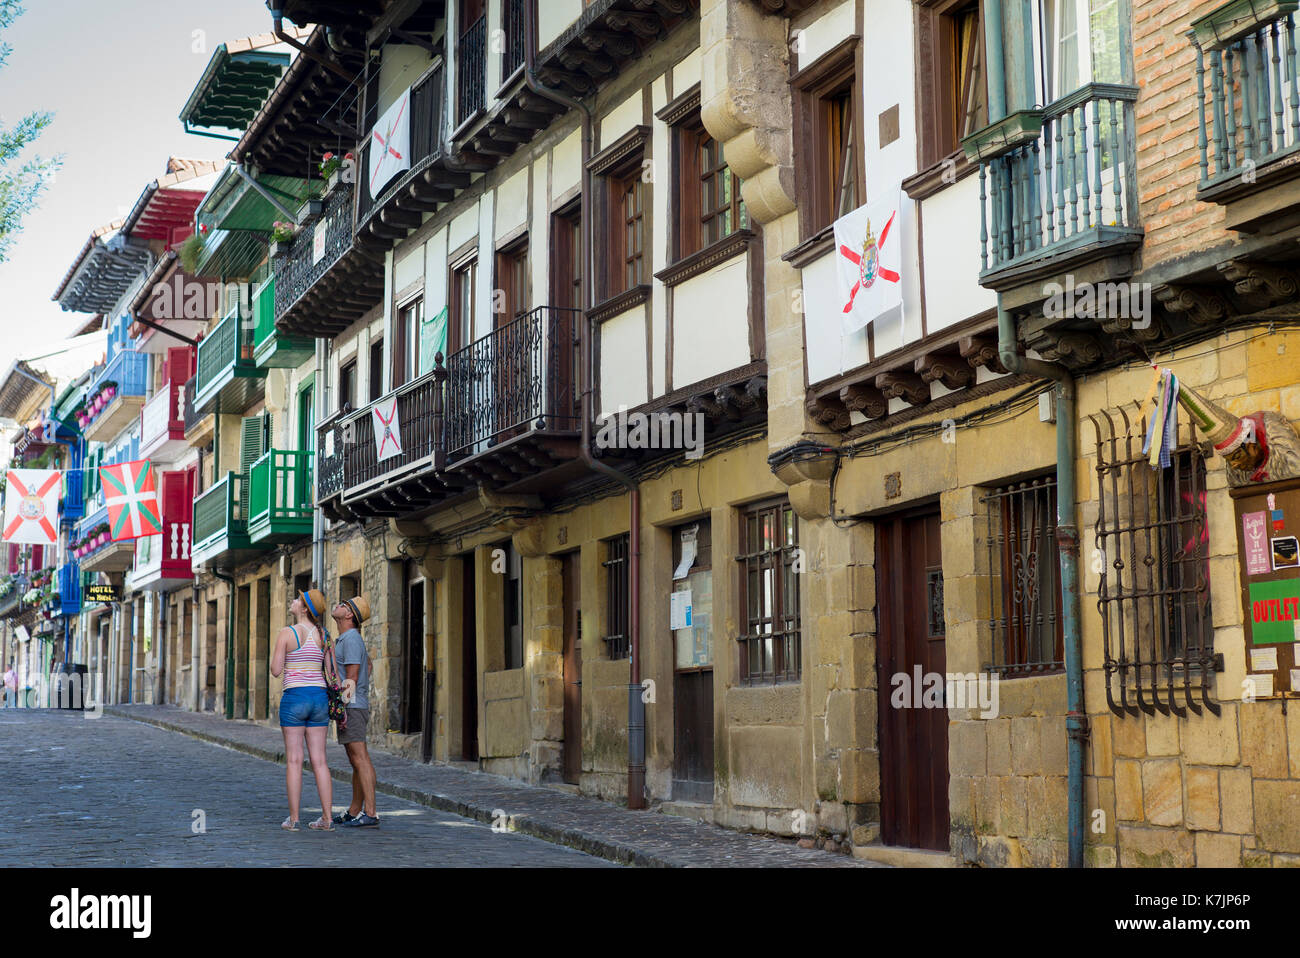 Tourists couple in street scene in alleyway of old town Hondarribia, in Basque Country, Spain Stock Photo